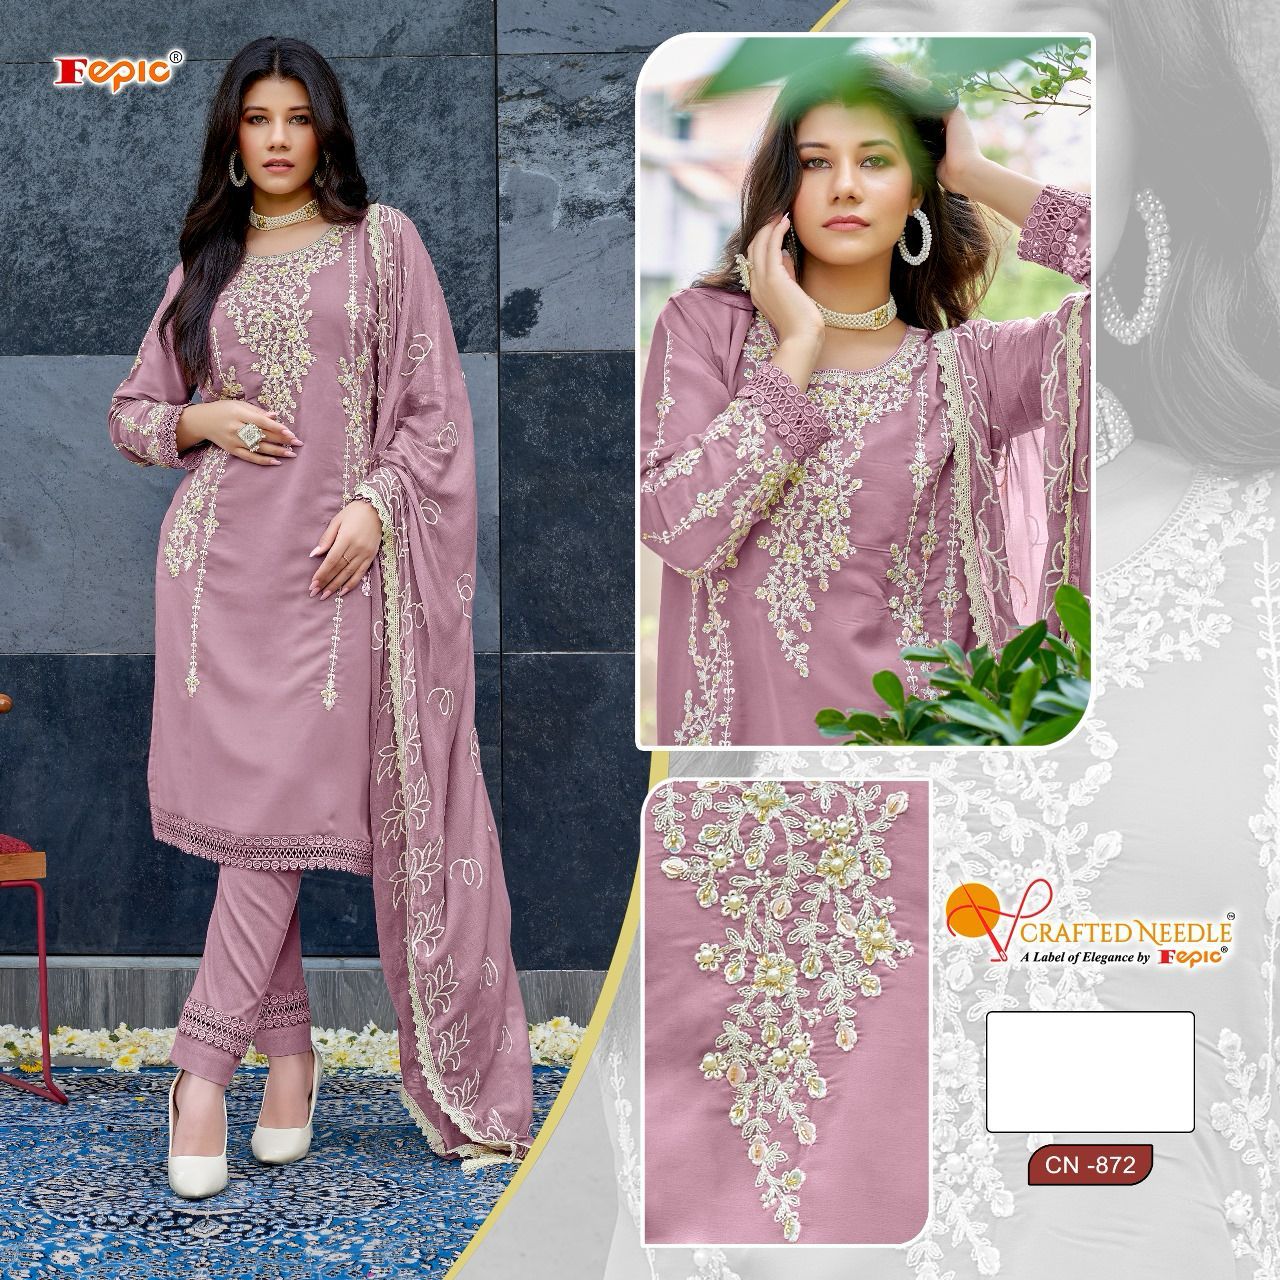 872 Crafted Needle Georgette Pakistani Readymade Suits